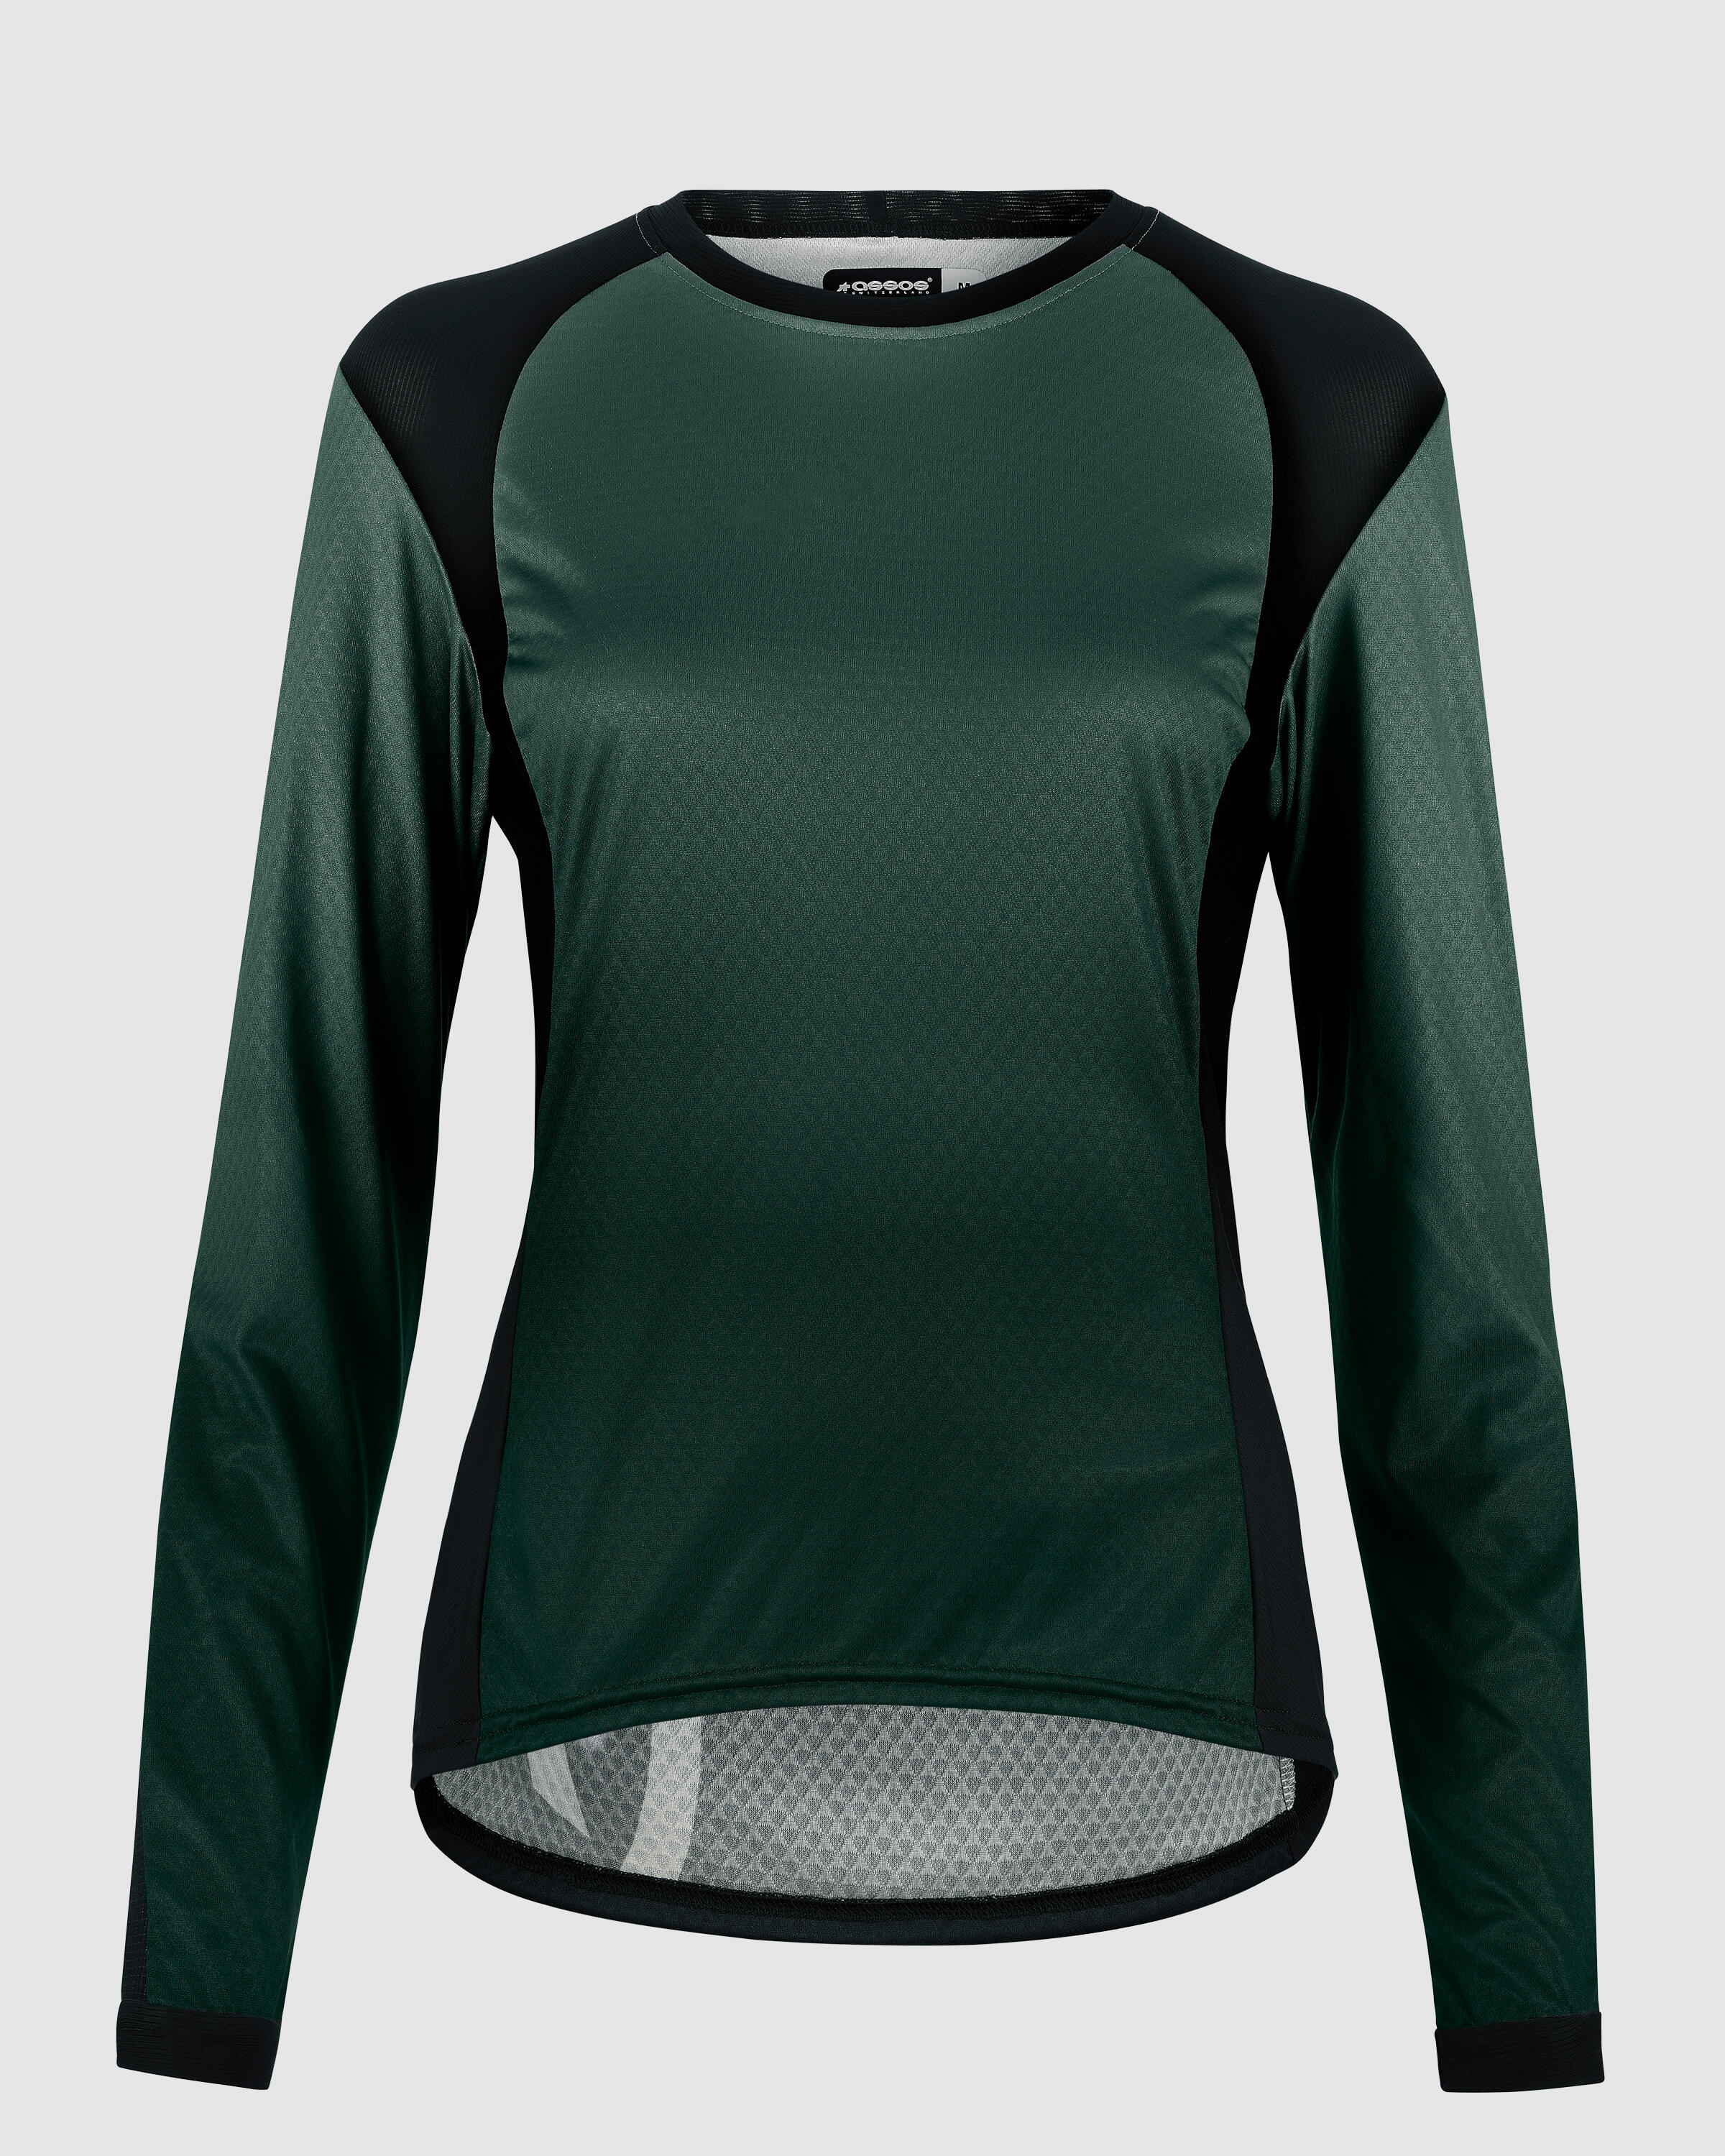 TRAIL Womens LS Jersey T3 - ASSOS Of Switzerland - Official Outlet